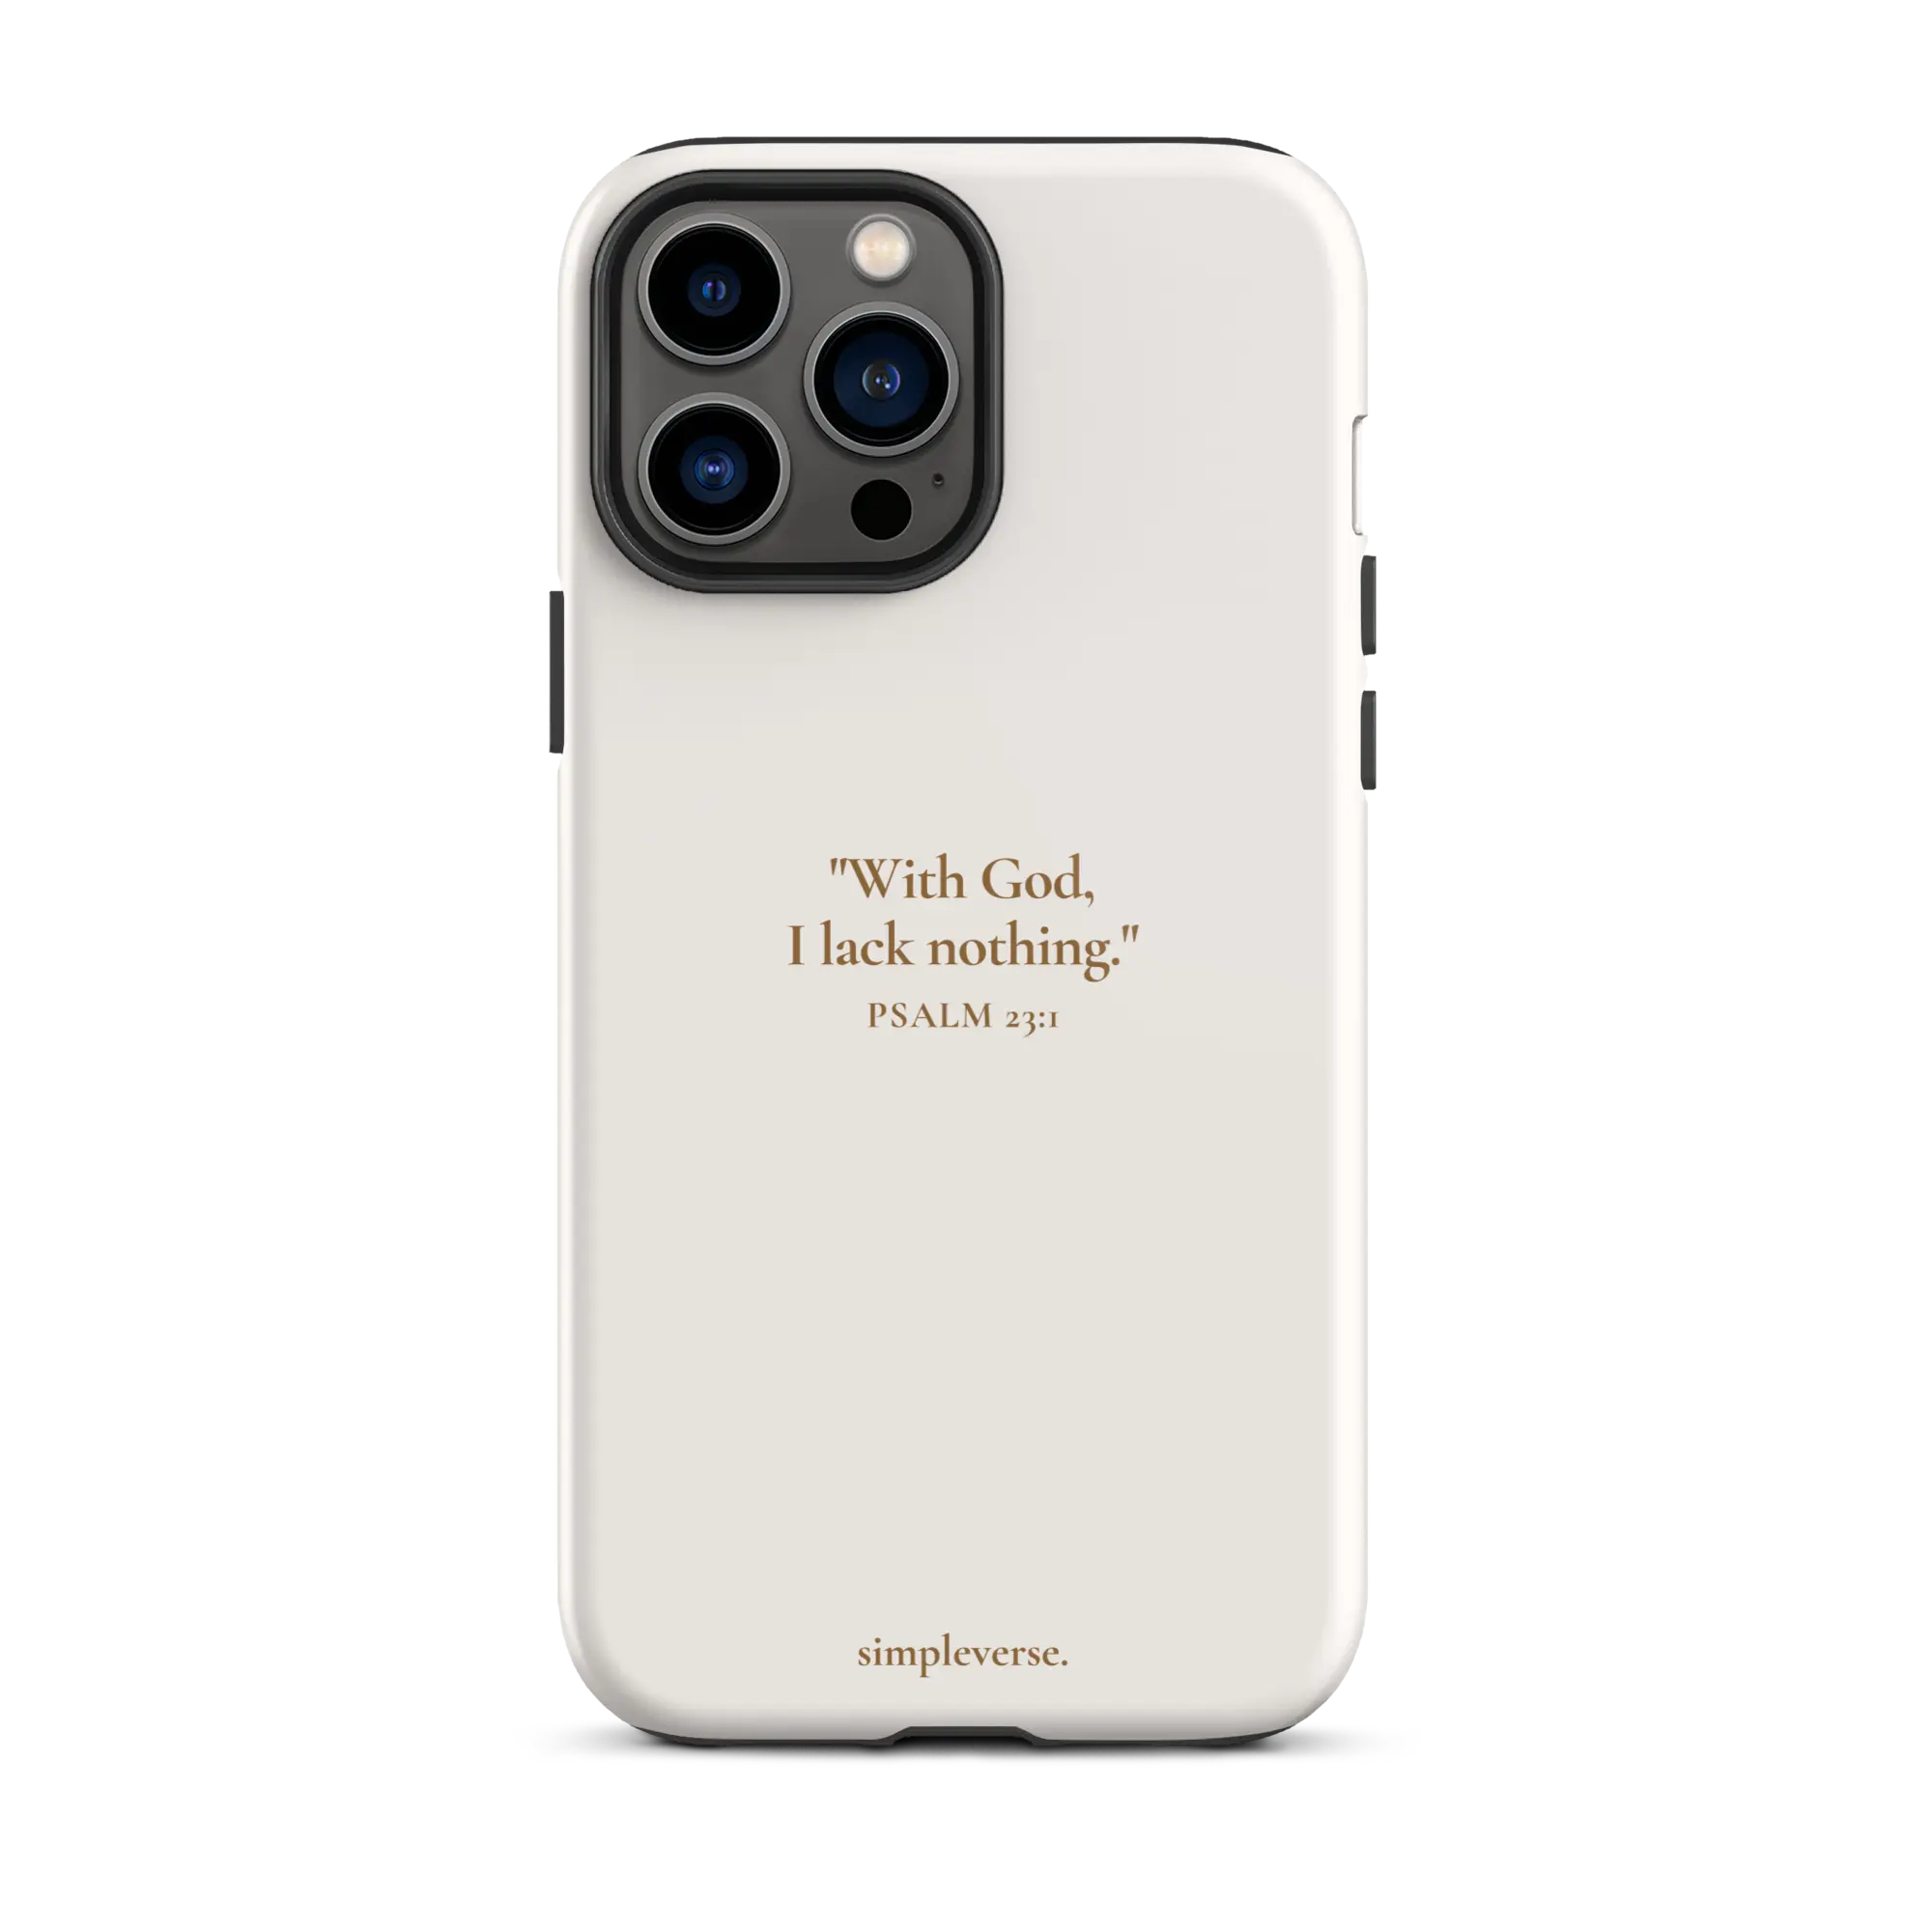 Elegant white iPhone case featuring the verse 'With God, I lack nothing. Psalm 23:1' from Simpleverse brand.